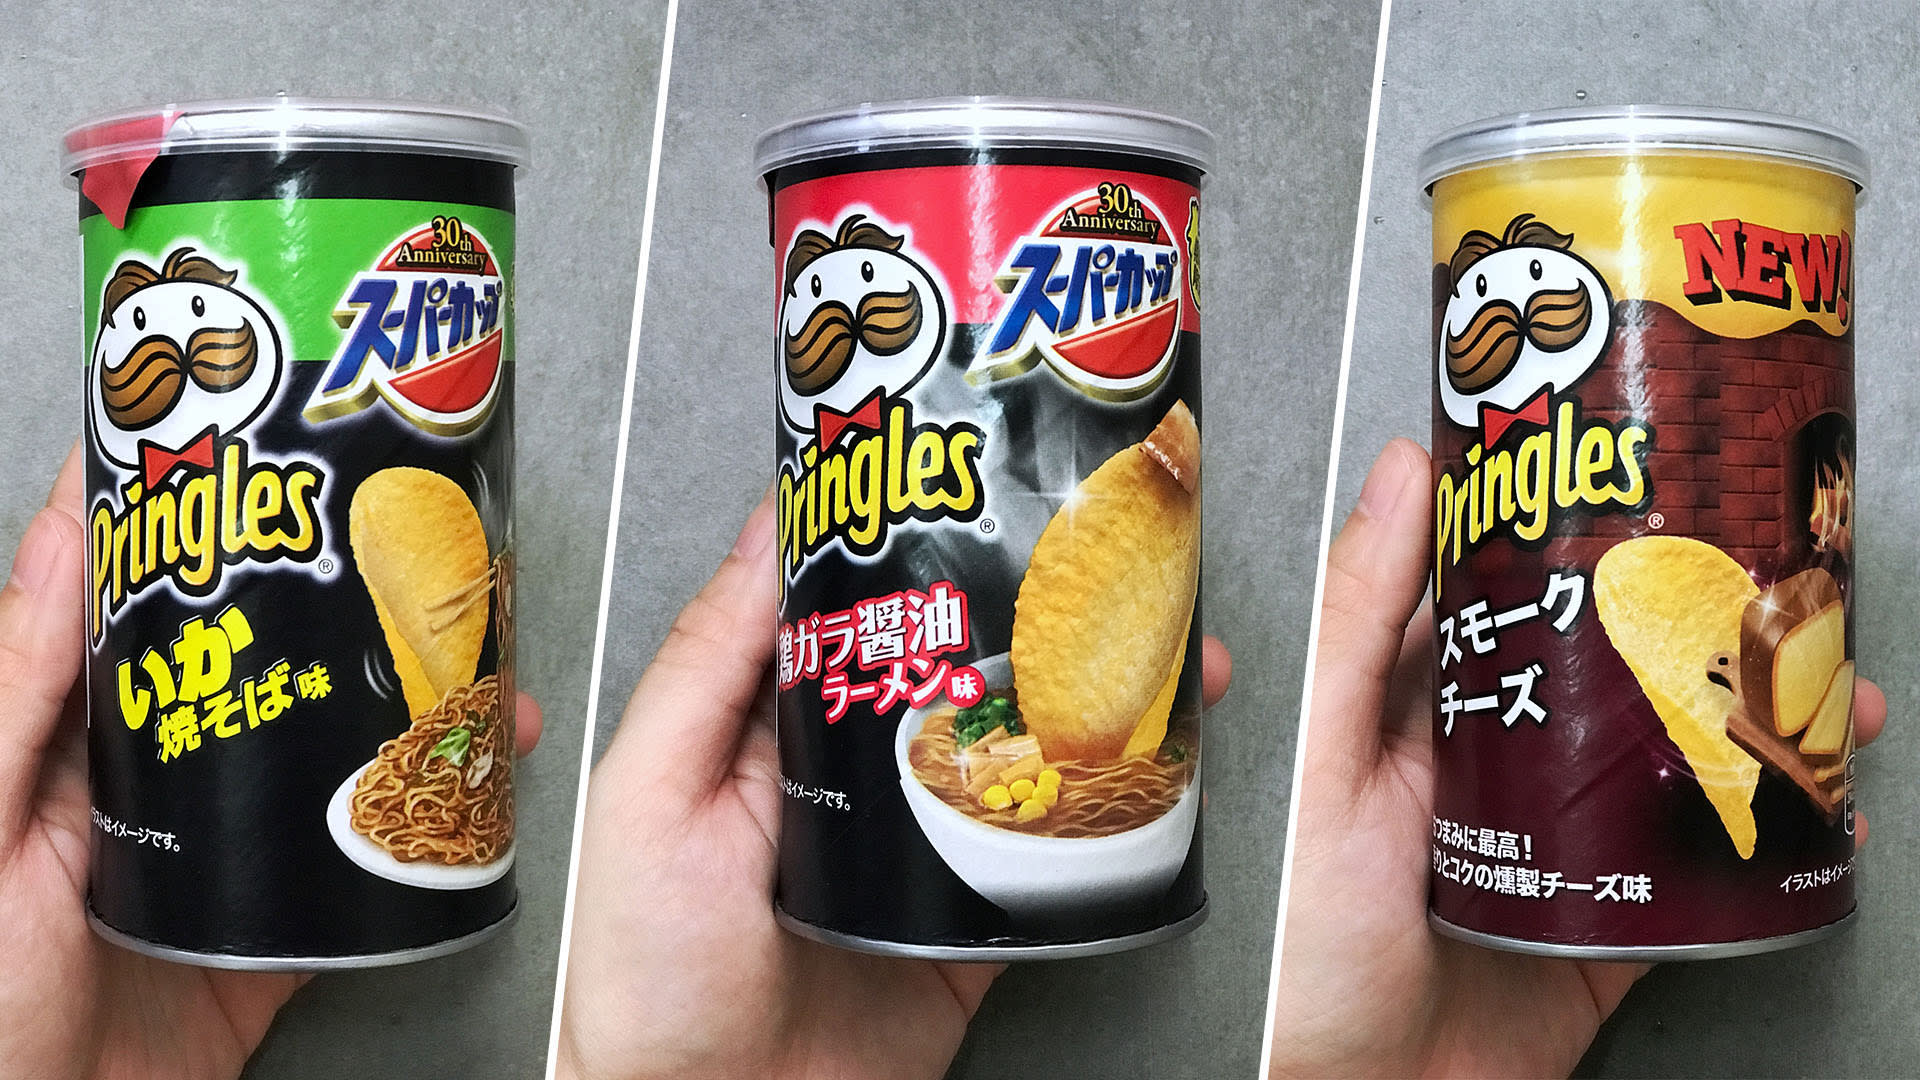 New Japanese Pringles Flavours Like Soy Chicken 'Ramen' Sold In Singapore For $1.60 Each